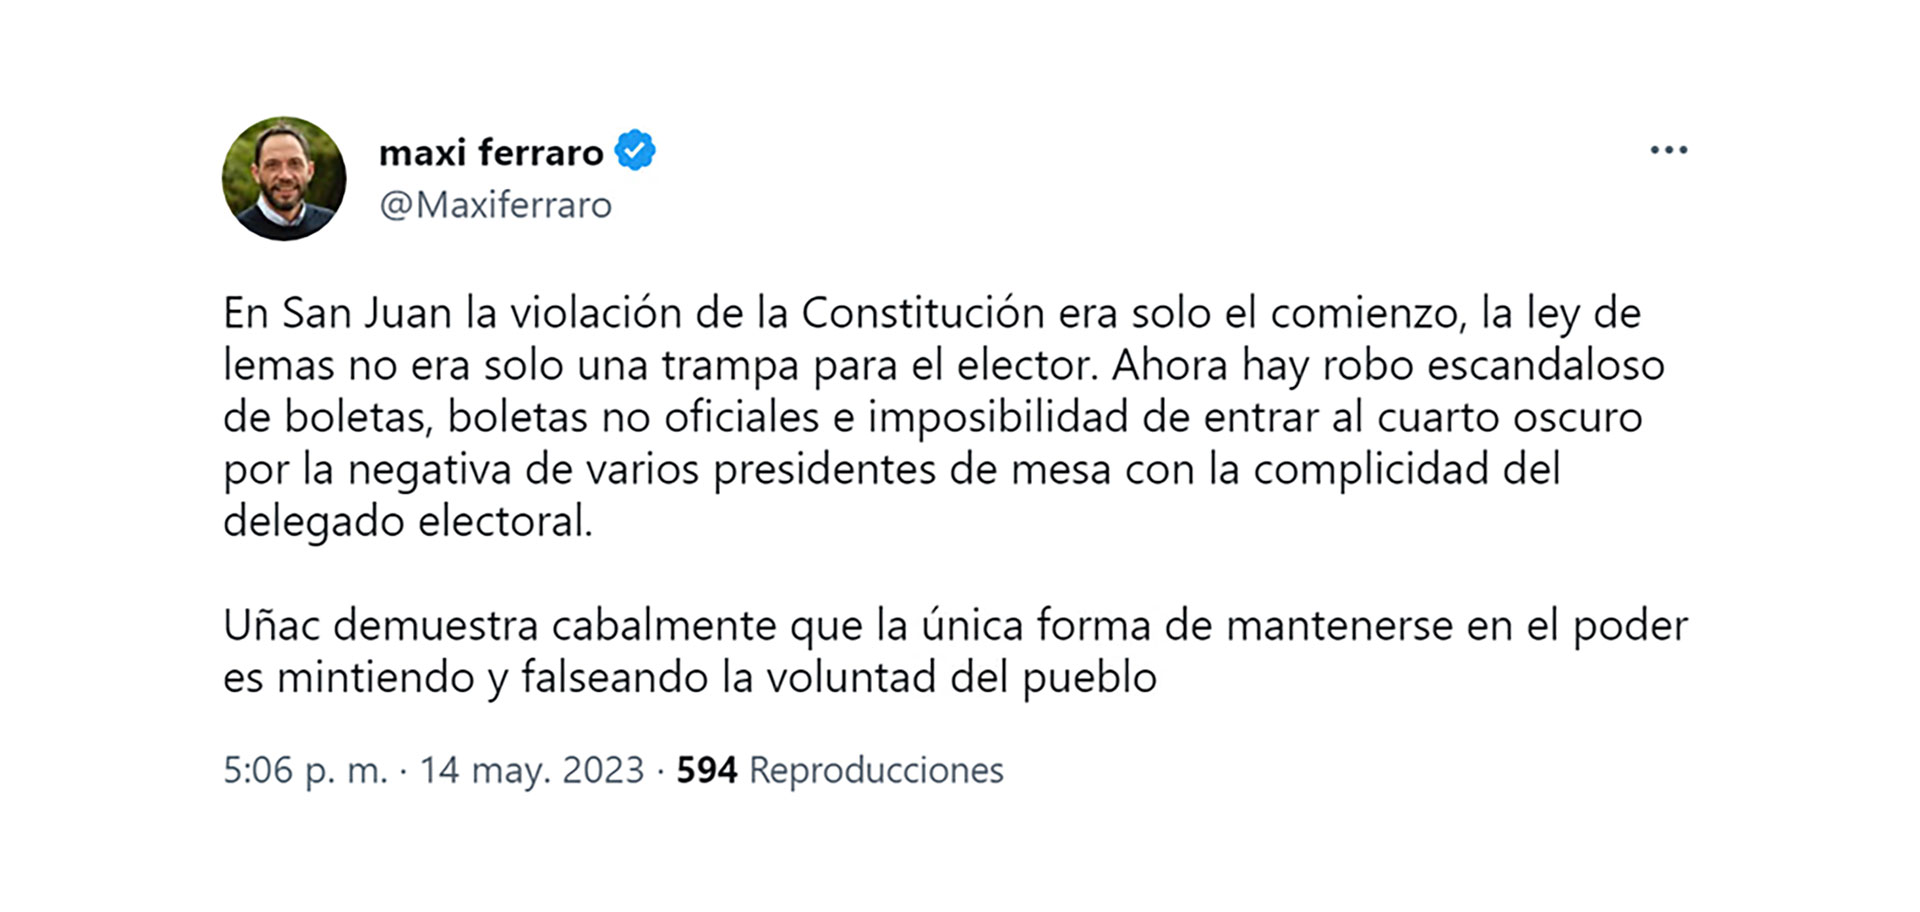 Maximiliano Ferraro was one of the deputies who denounced the theft of ballots in the San Juan elections